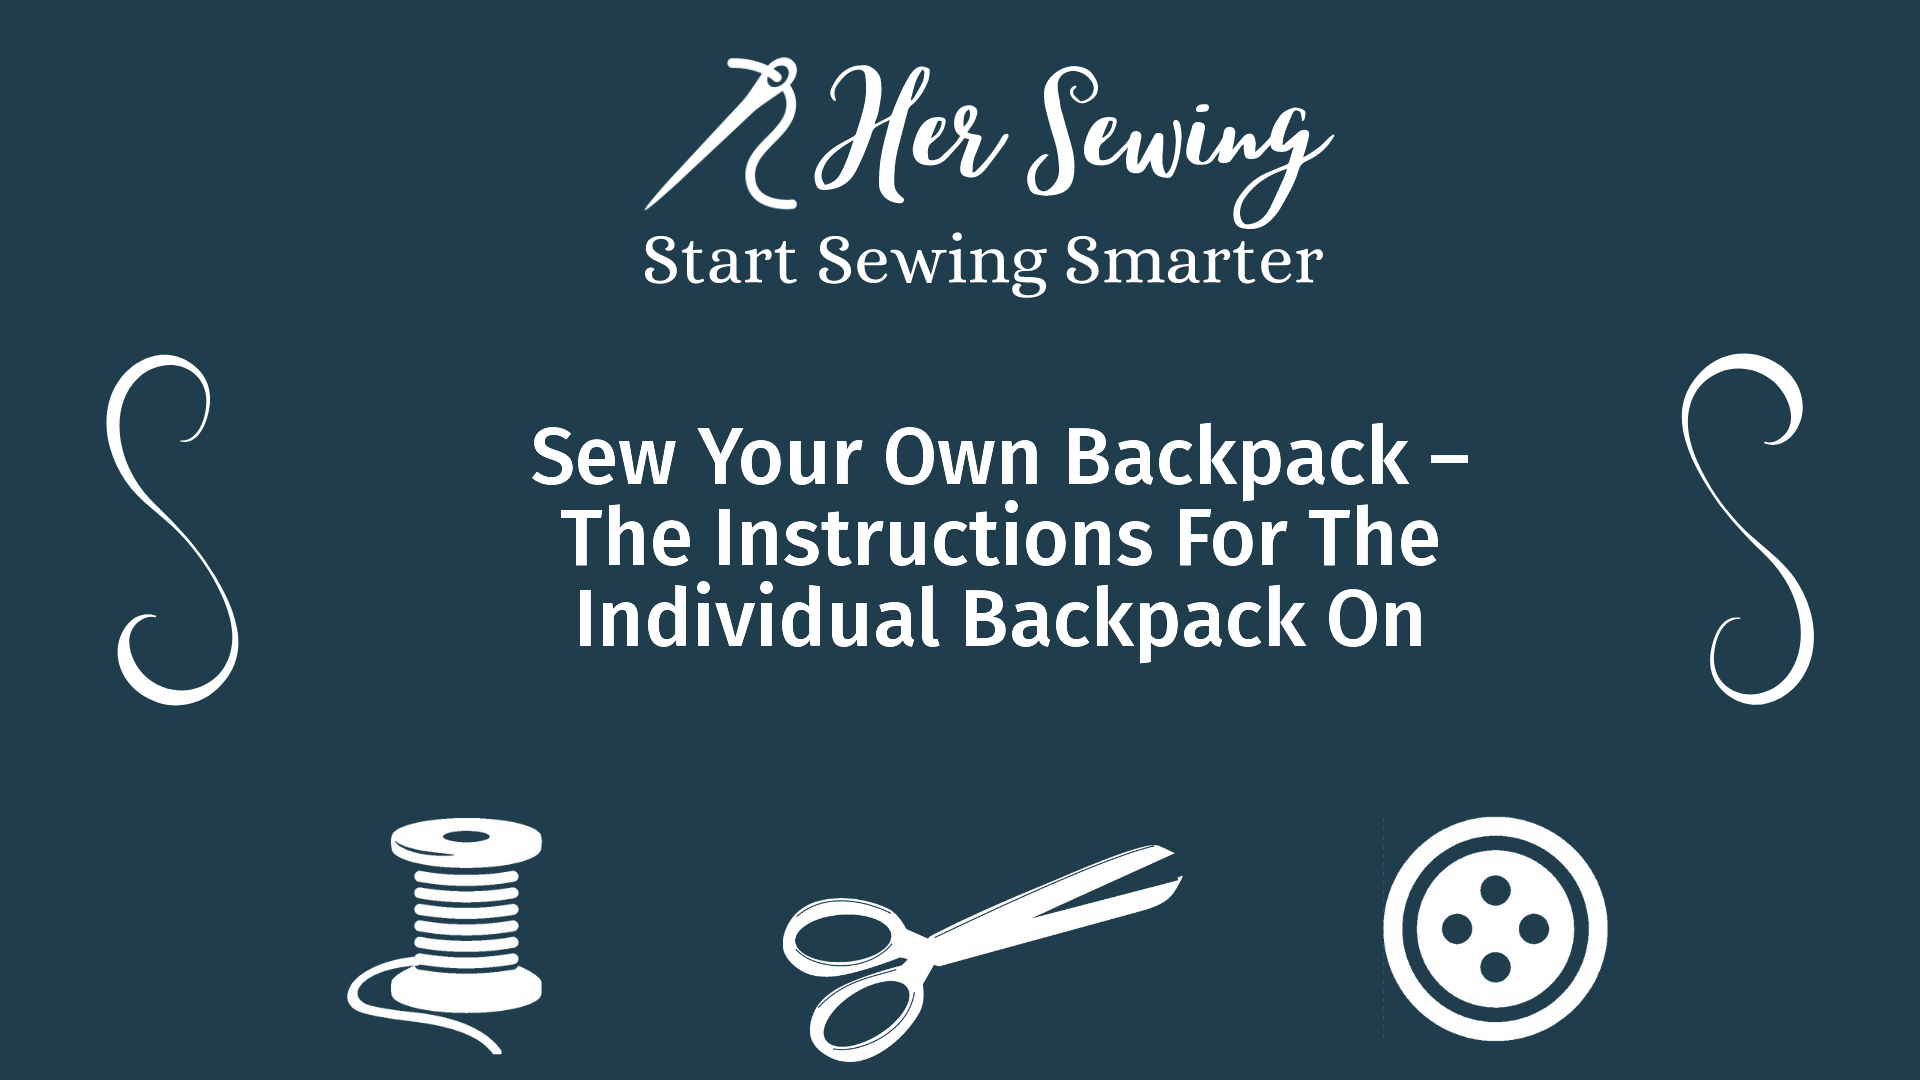 Sew Your Own Backpack – The Instructions For The Individual Backpack On